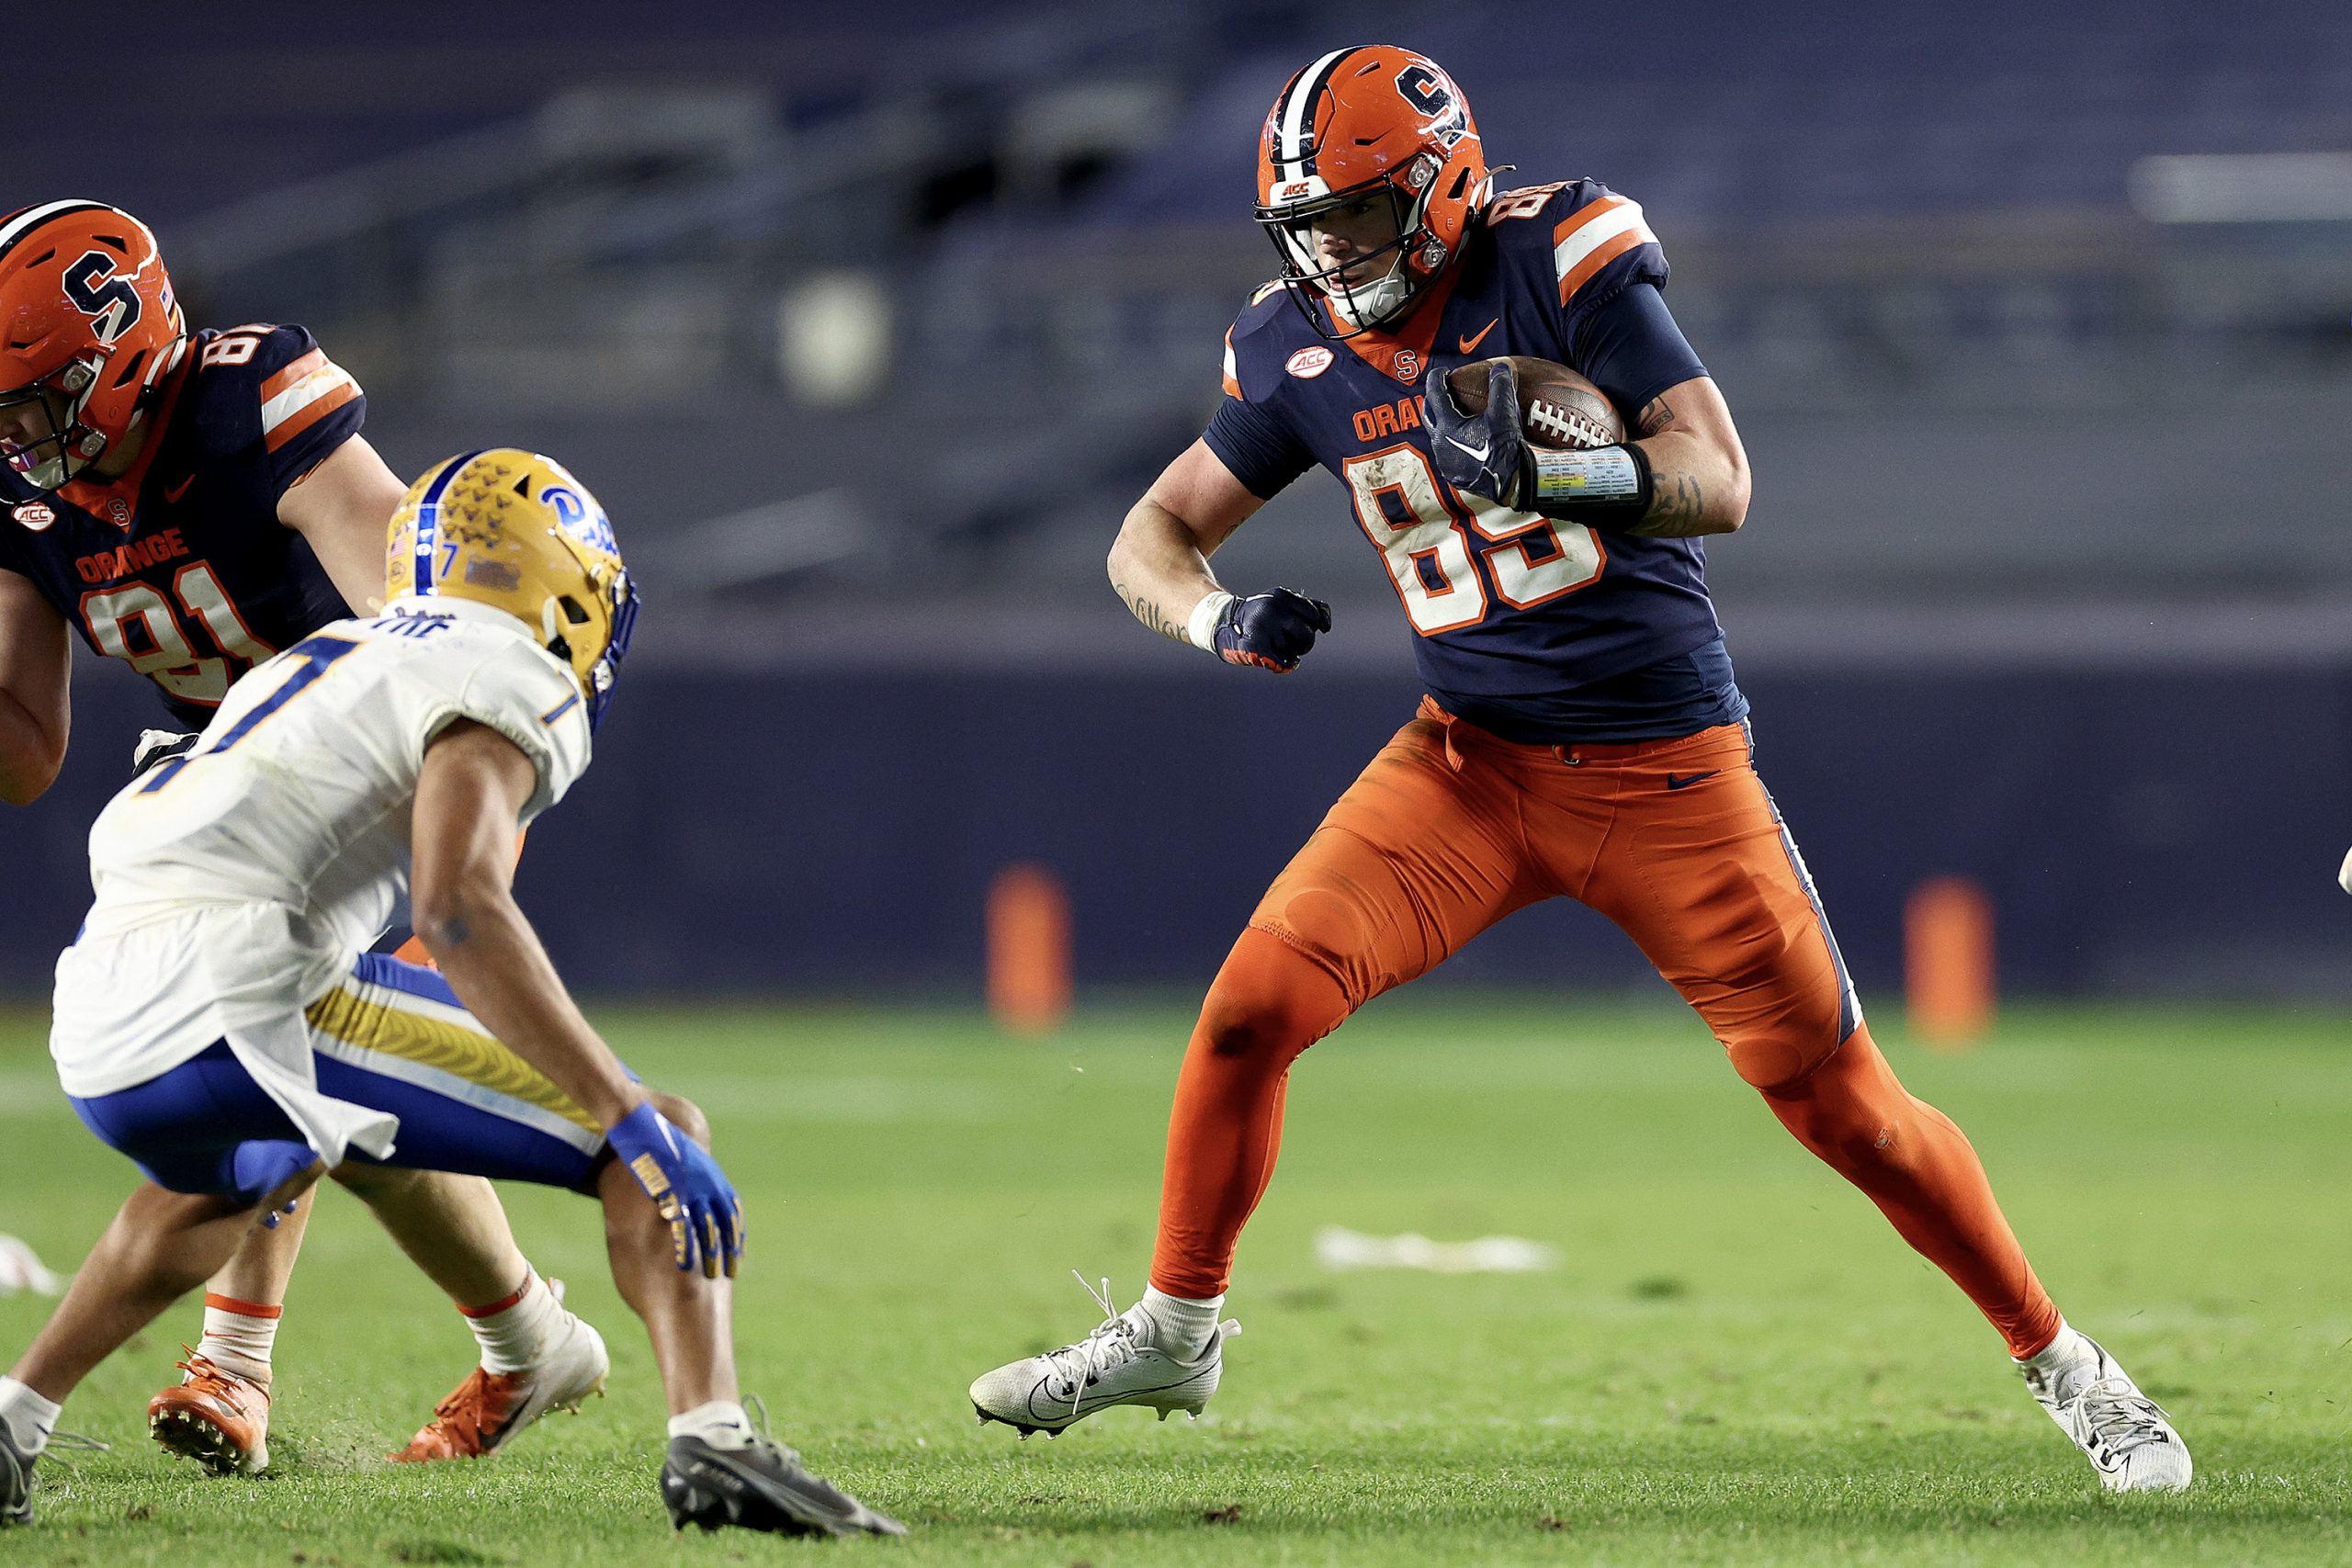 SU tight end Dan Villari (#89) of the Syracuse Orange carries the ball during the second half of Saturday's game against Pittsburgh at Yankee Stadium.